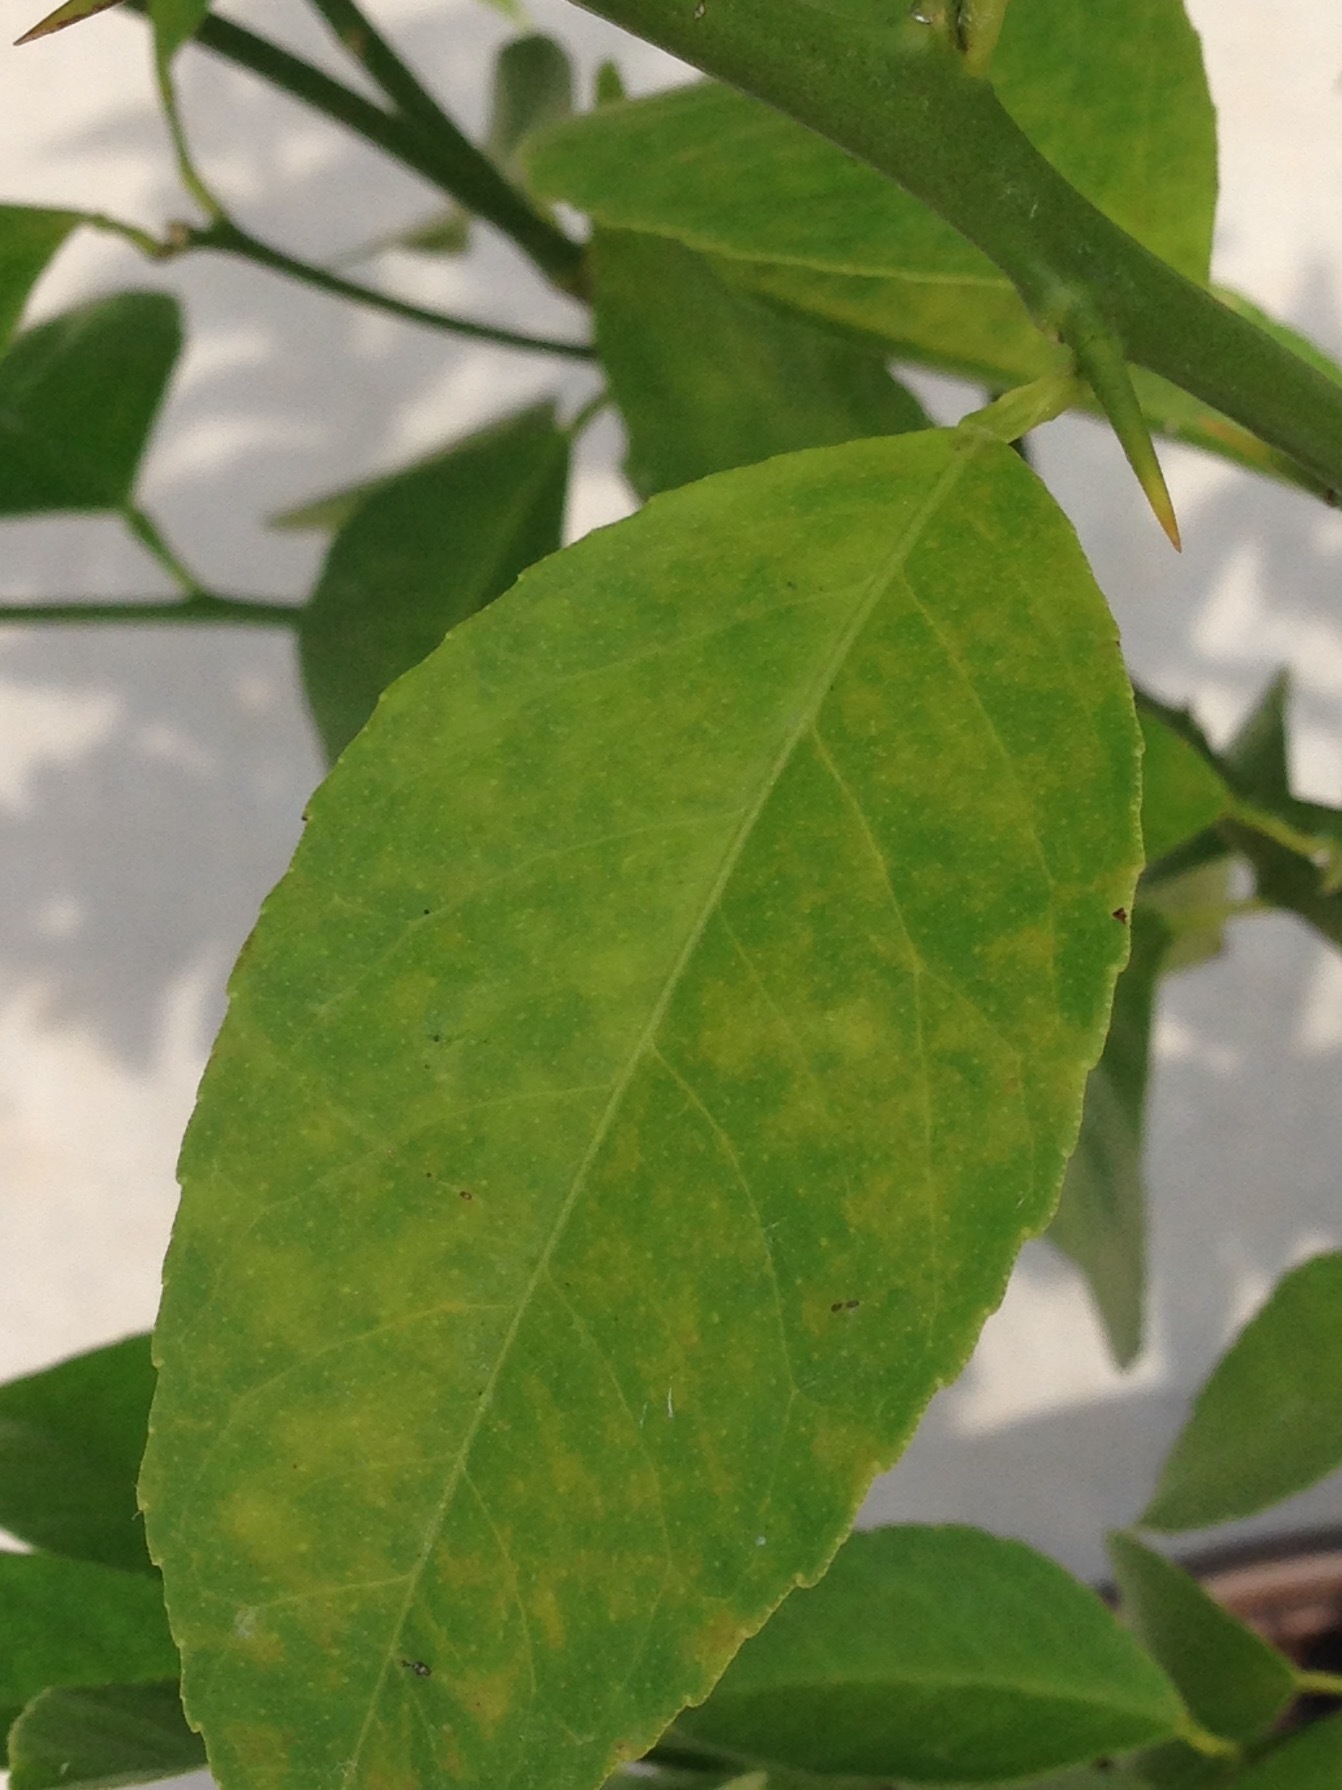 Yellow spotted lemon tree leaves - Ask an Expert